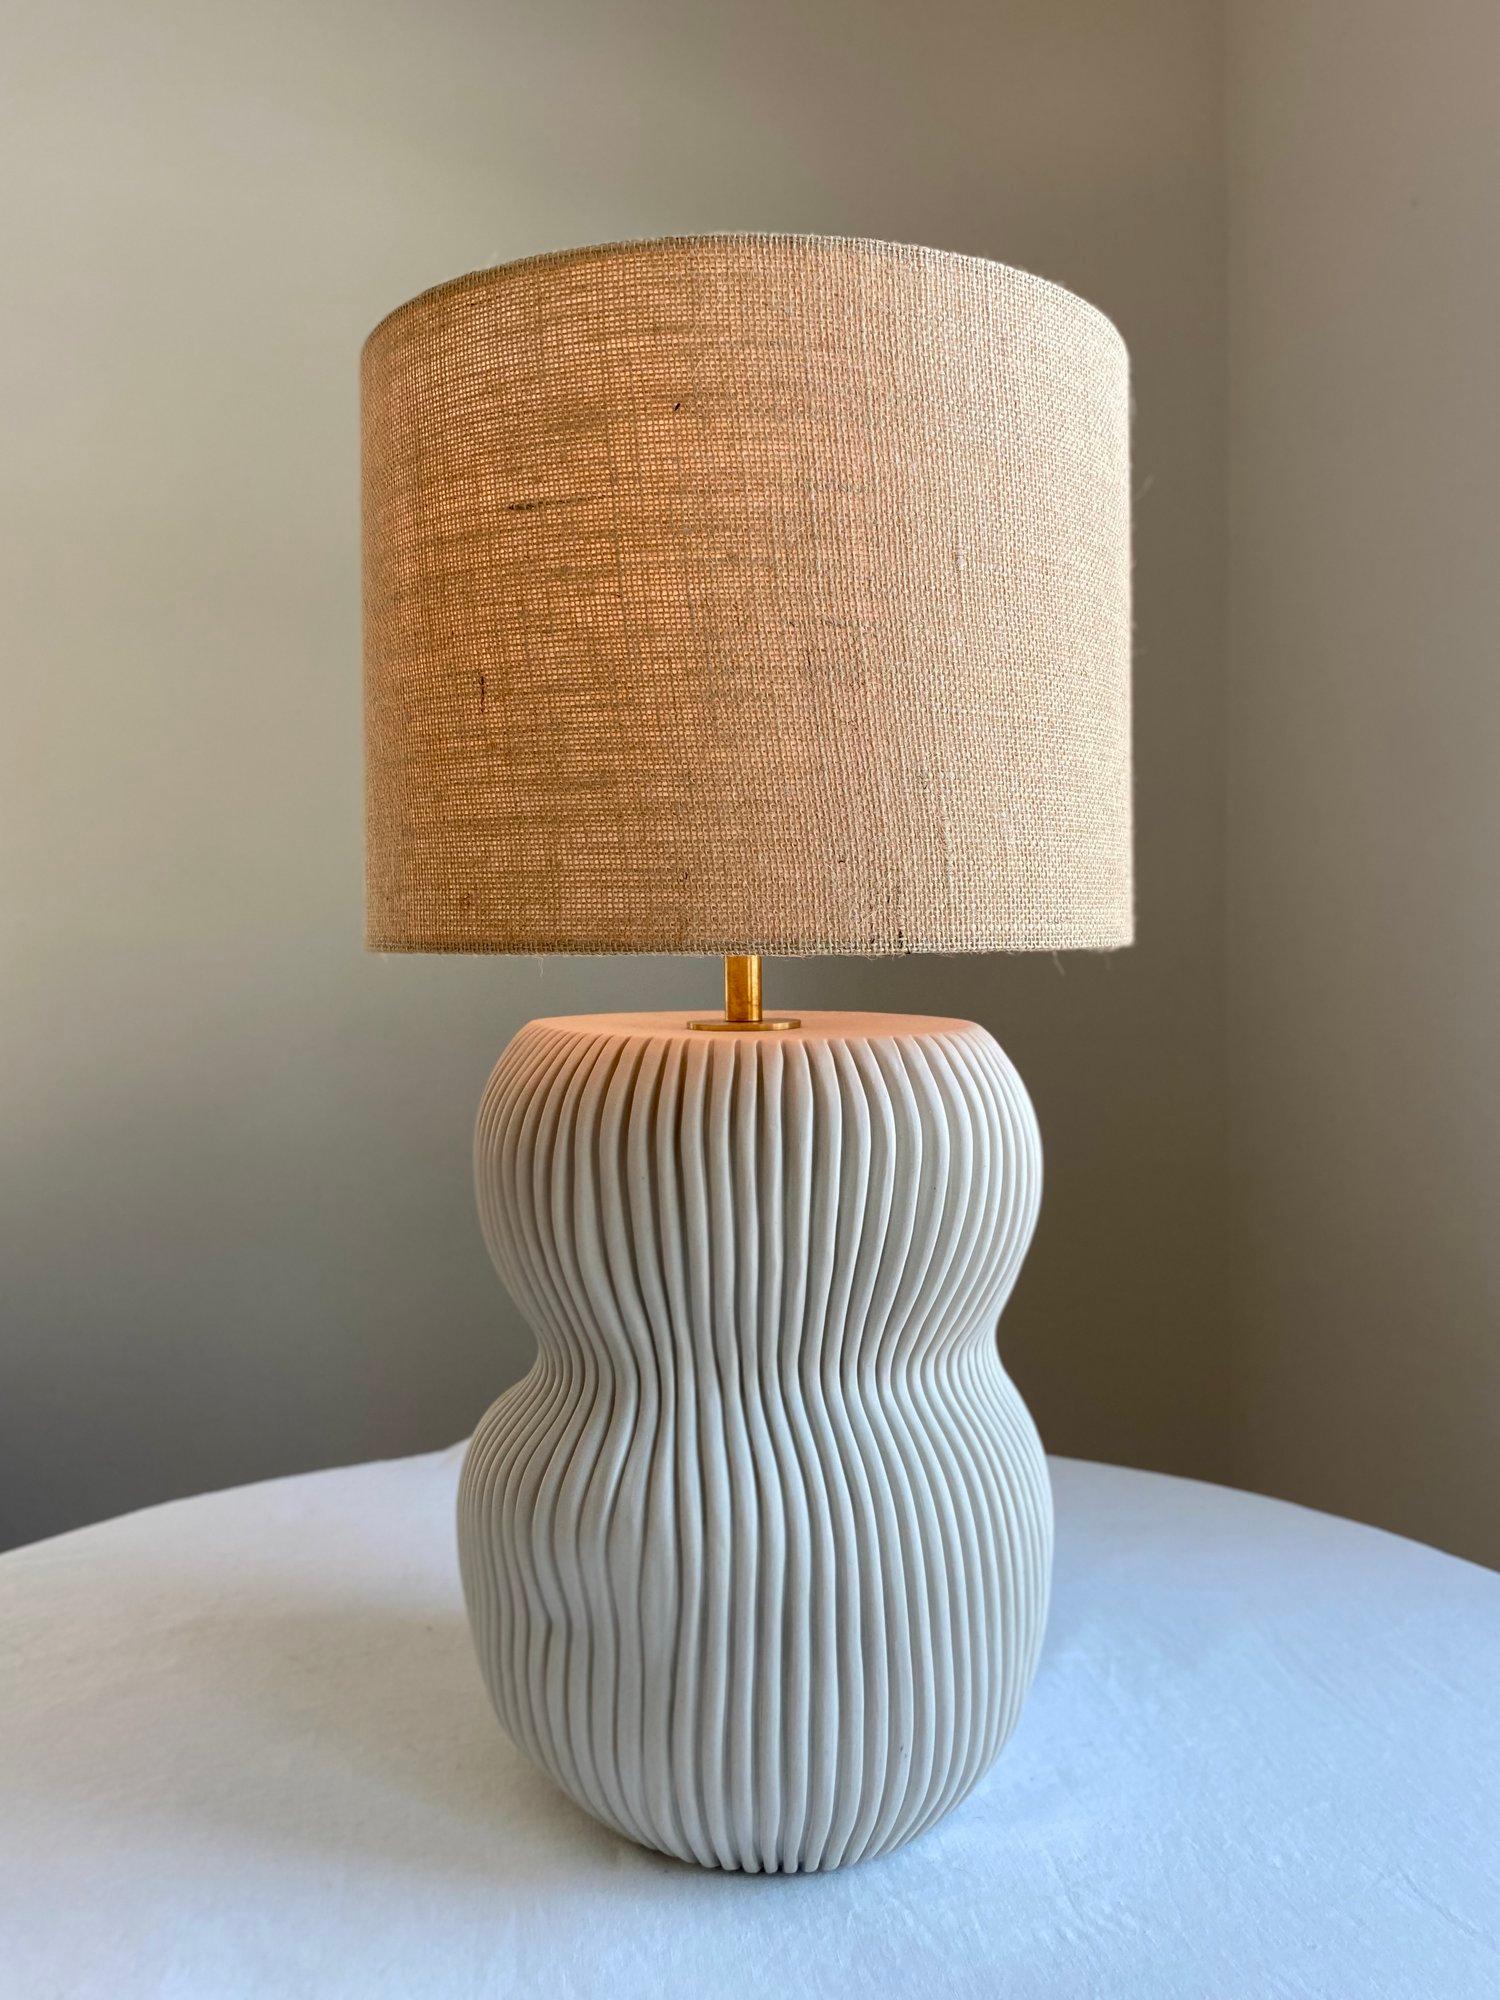 Hand-Crafted Organic Table Lamp #1